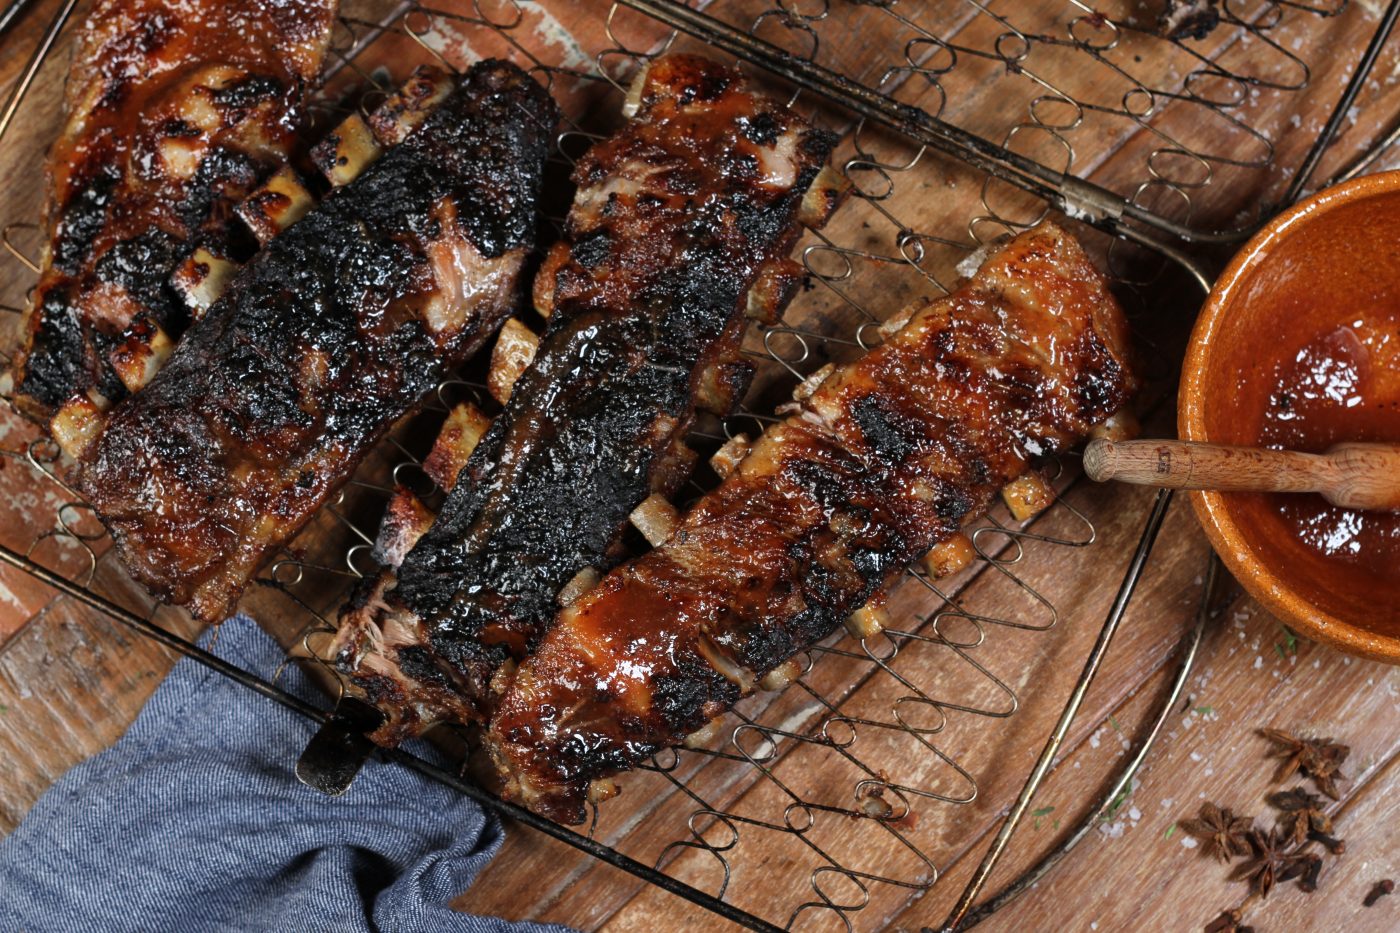 Barbecued Iberico Pork Ribs with Quince Glaze